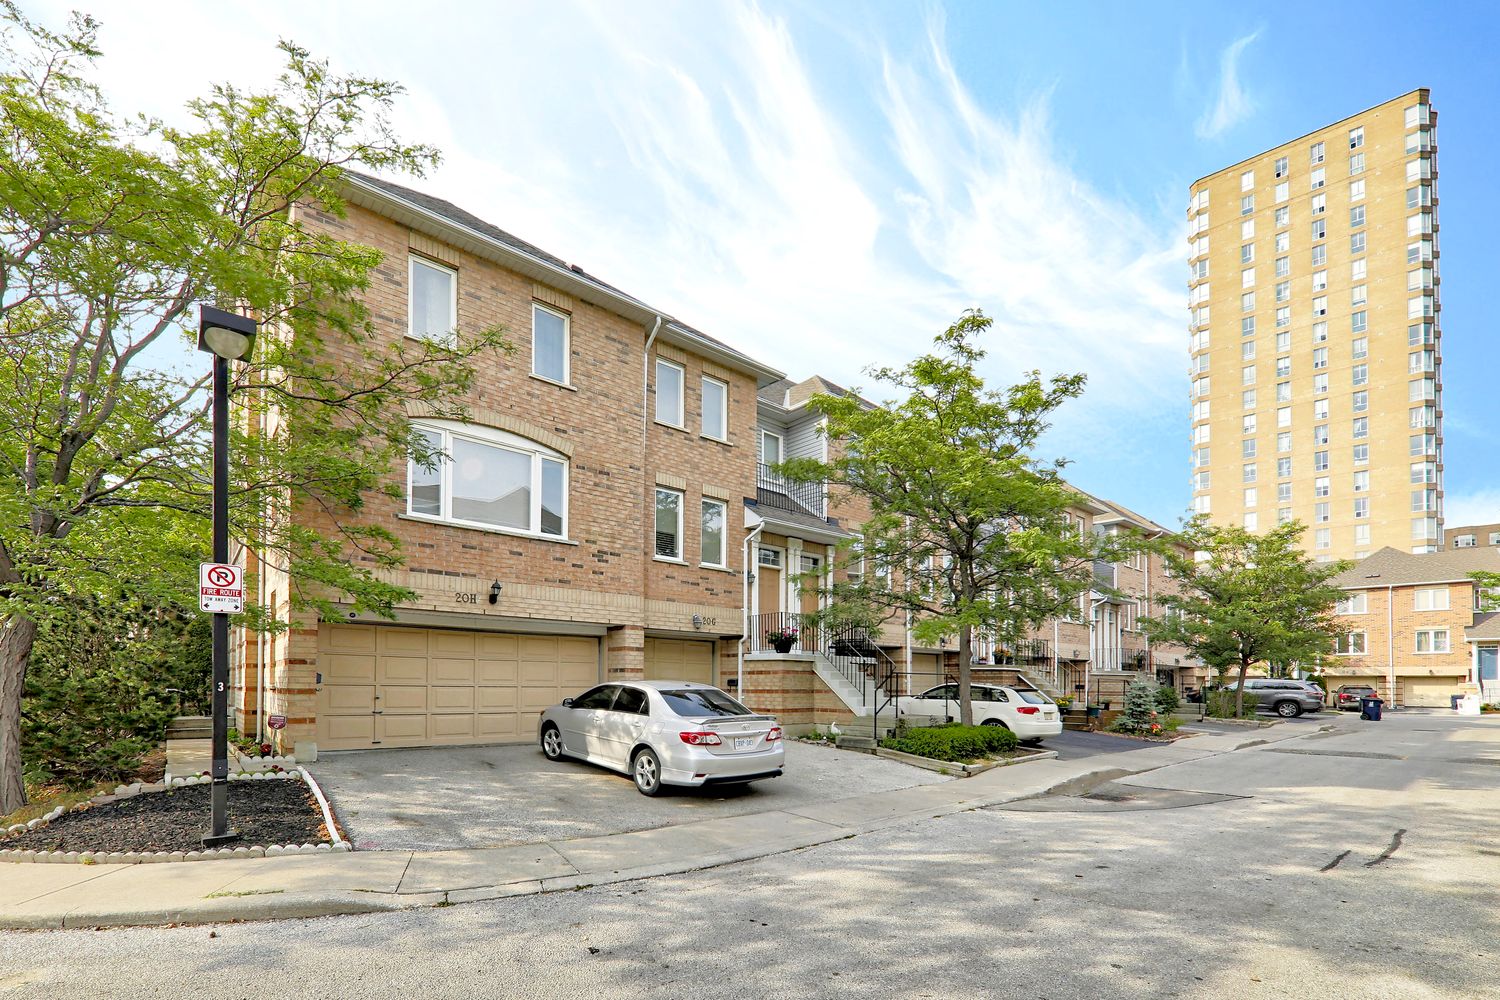 2-22 Leaside Park Drive. Leaside Green Townhomes is located in  East York, Toronto - image #2 of 4